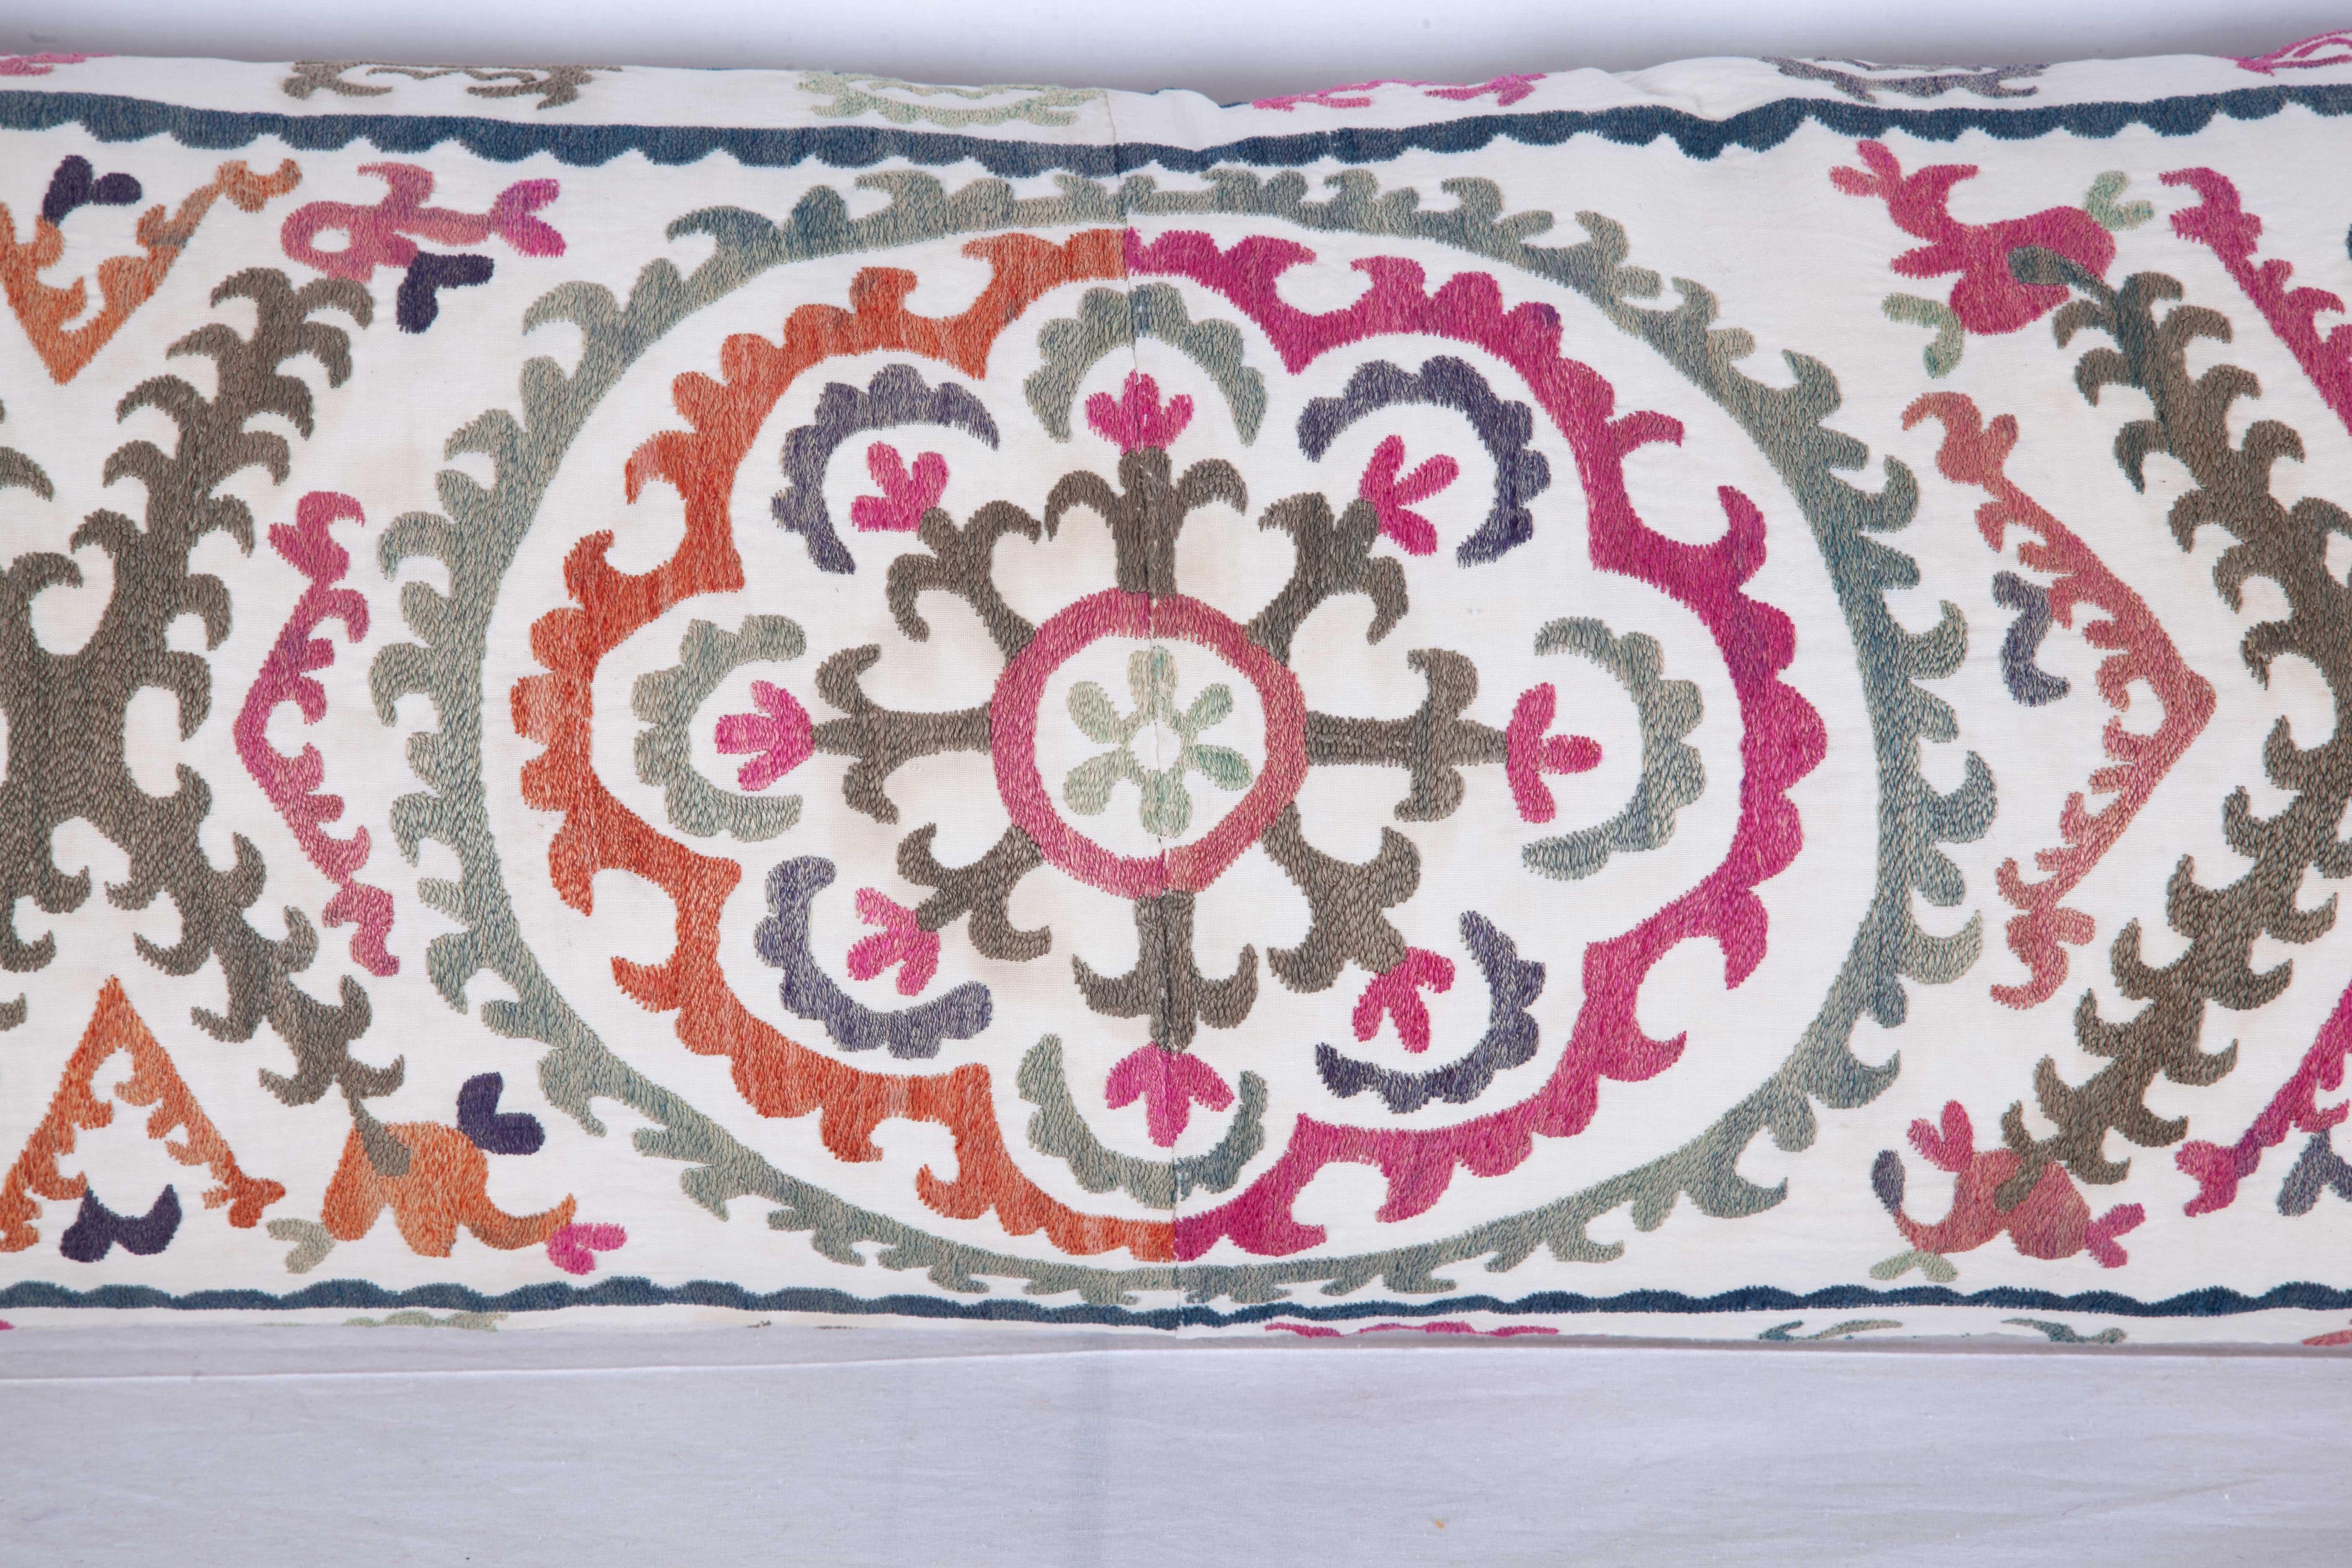 Embroidered Lumbar Pillow Case Made from a Mid-20th Century, Uzbek Suzani